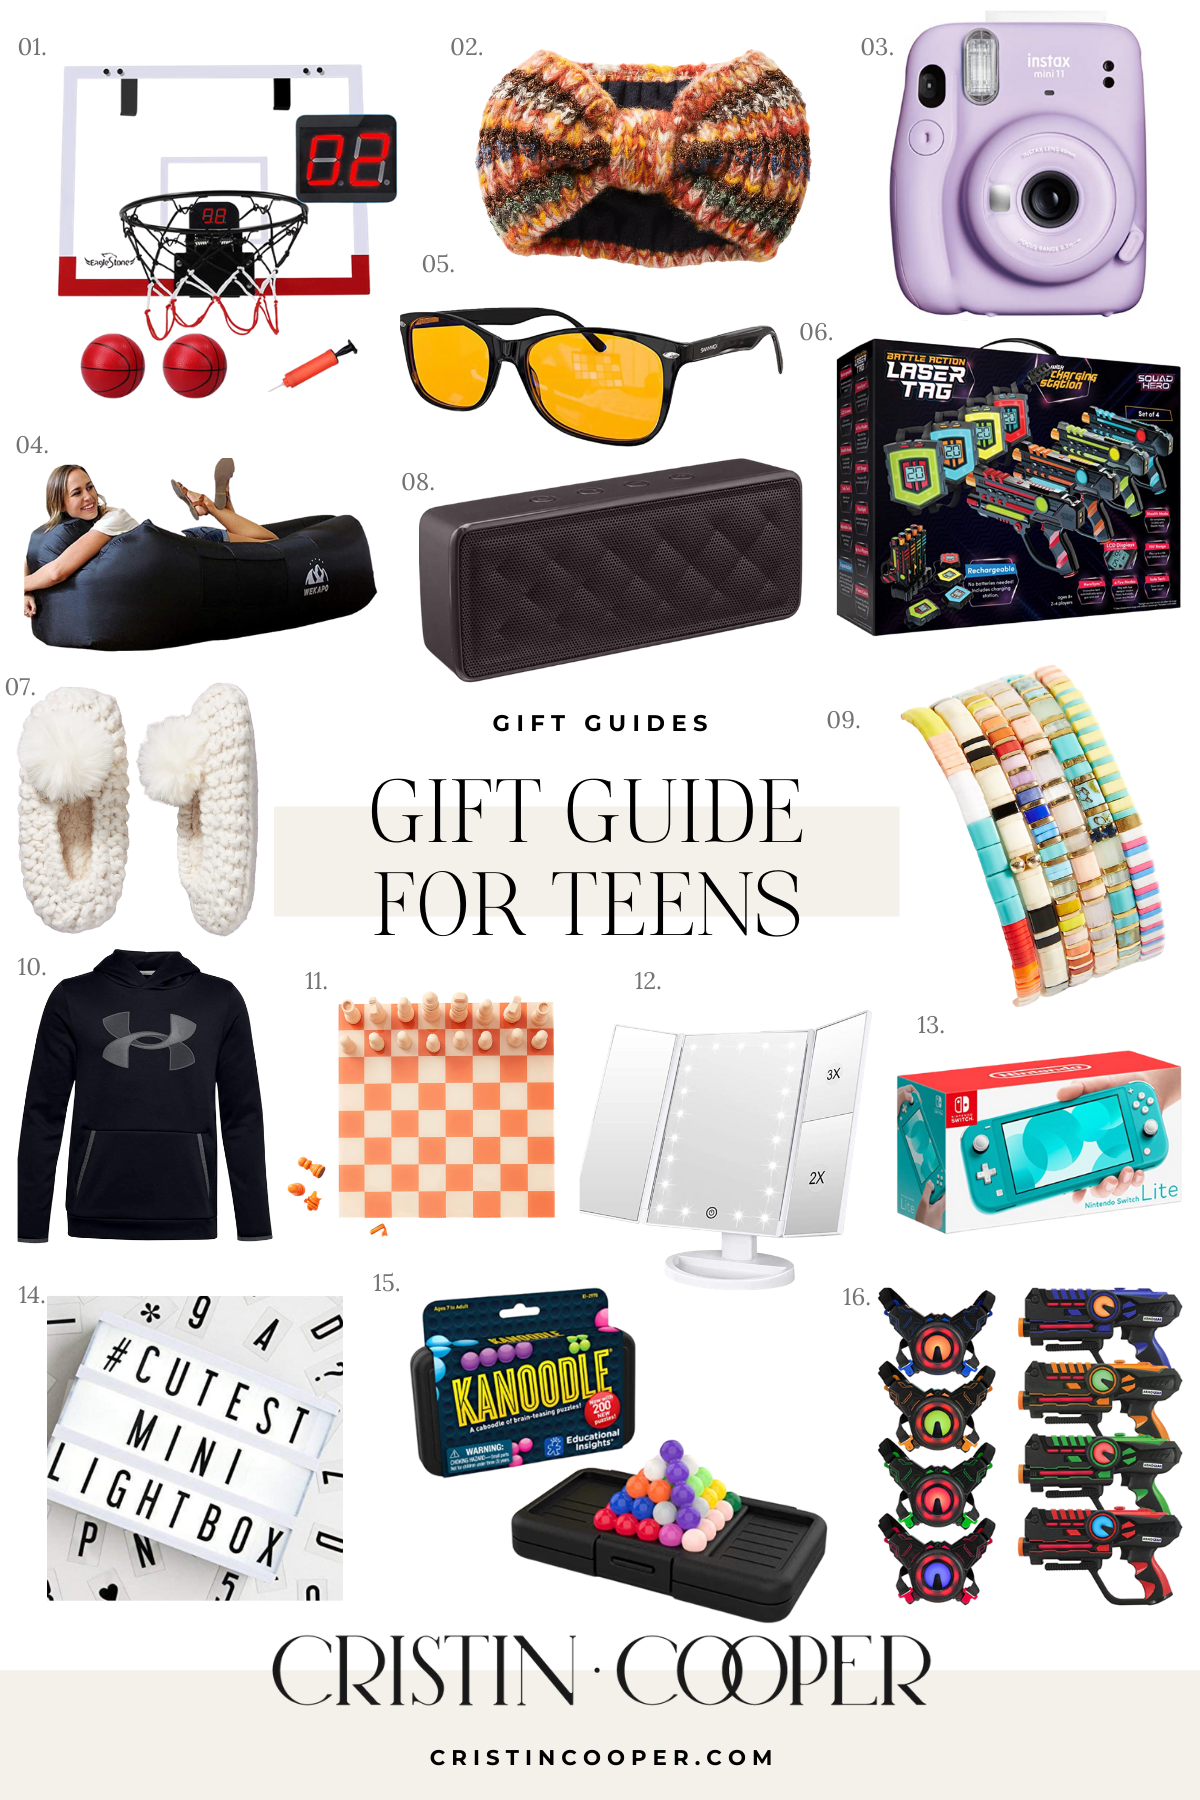 Gift guide for teens